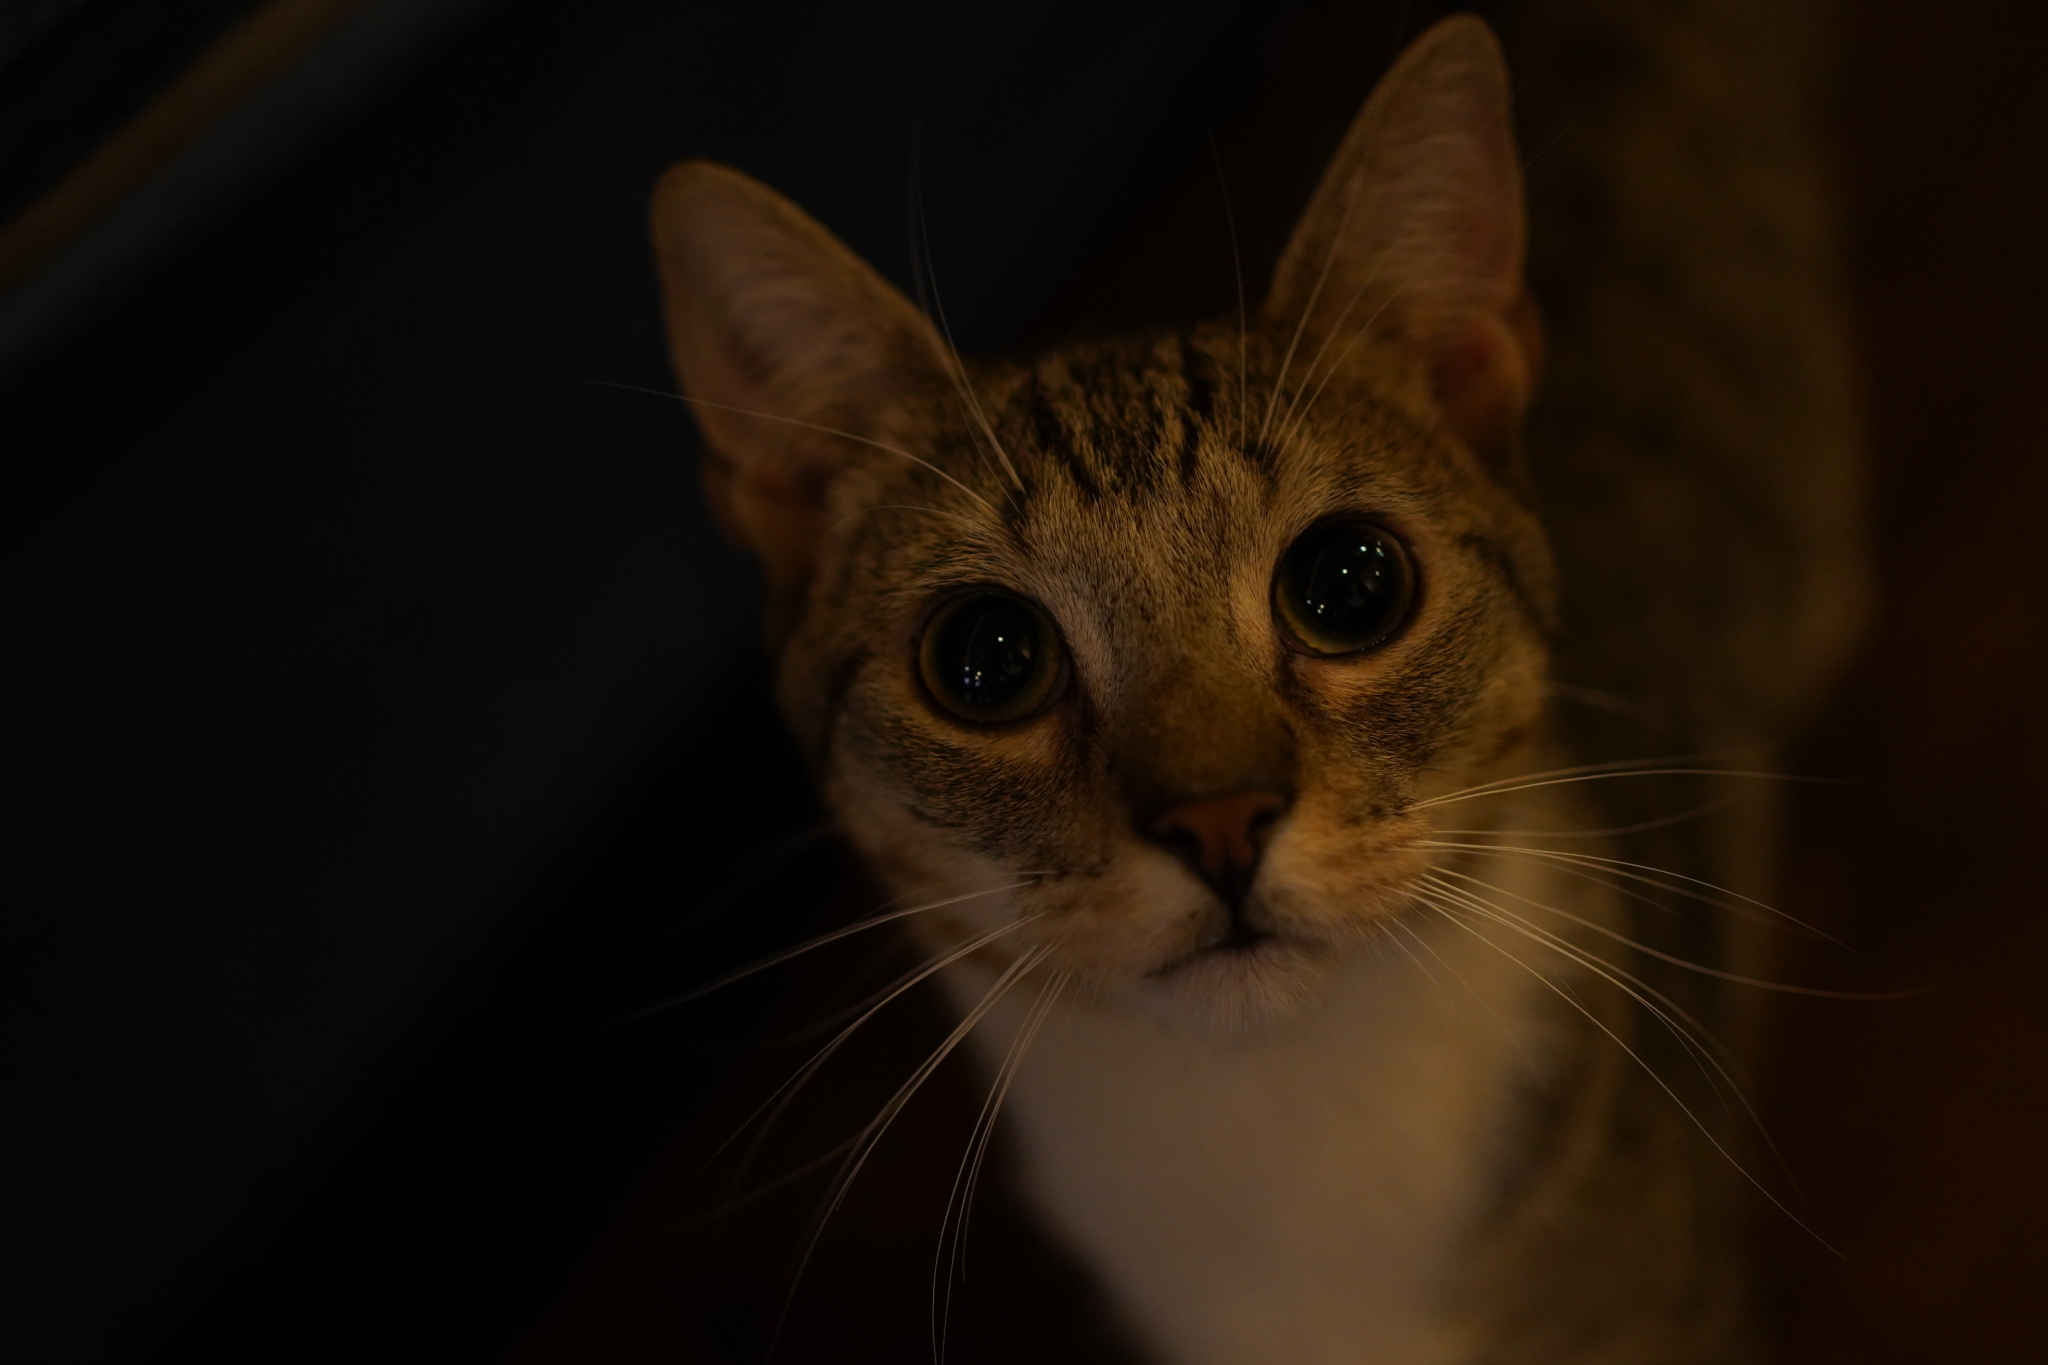 The face of a cat in lowlight